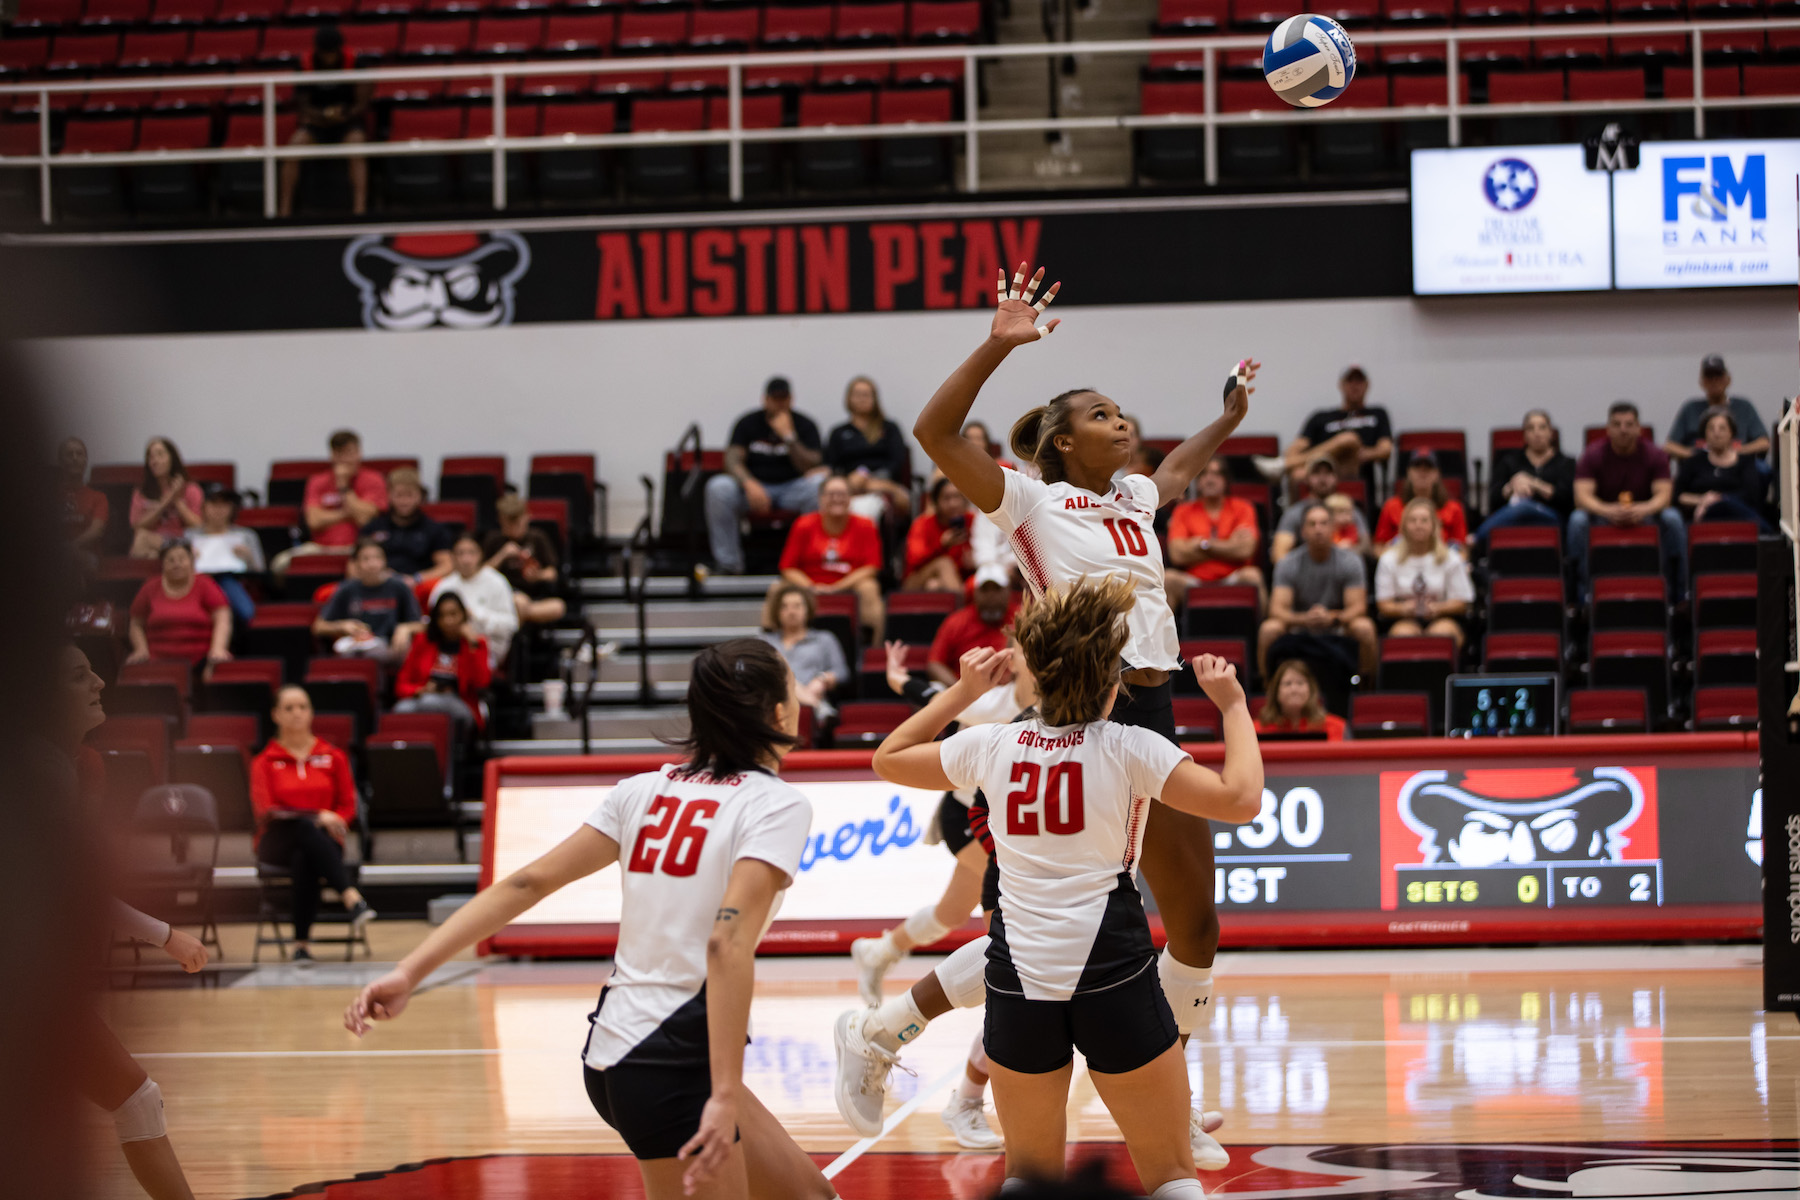     The Govs volleyball team celebrates a successful set during their 3-1 victory over North Dakota State University on Friday, Sept. 16.  Madison Casey | Student Photographer 